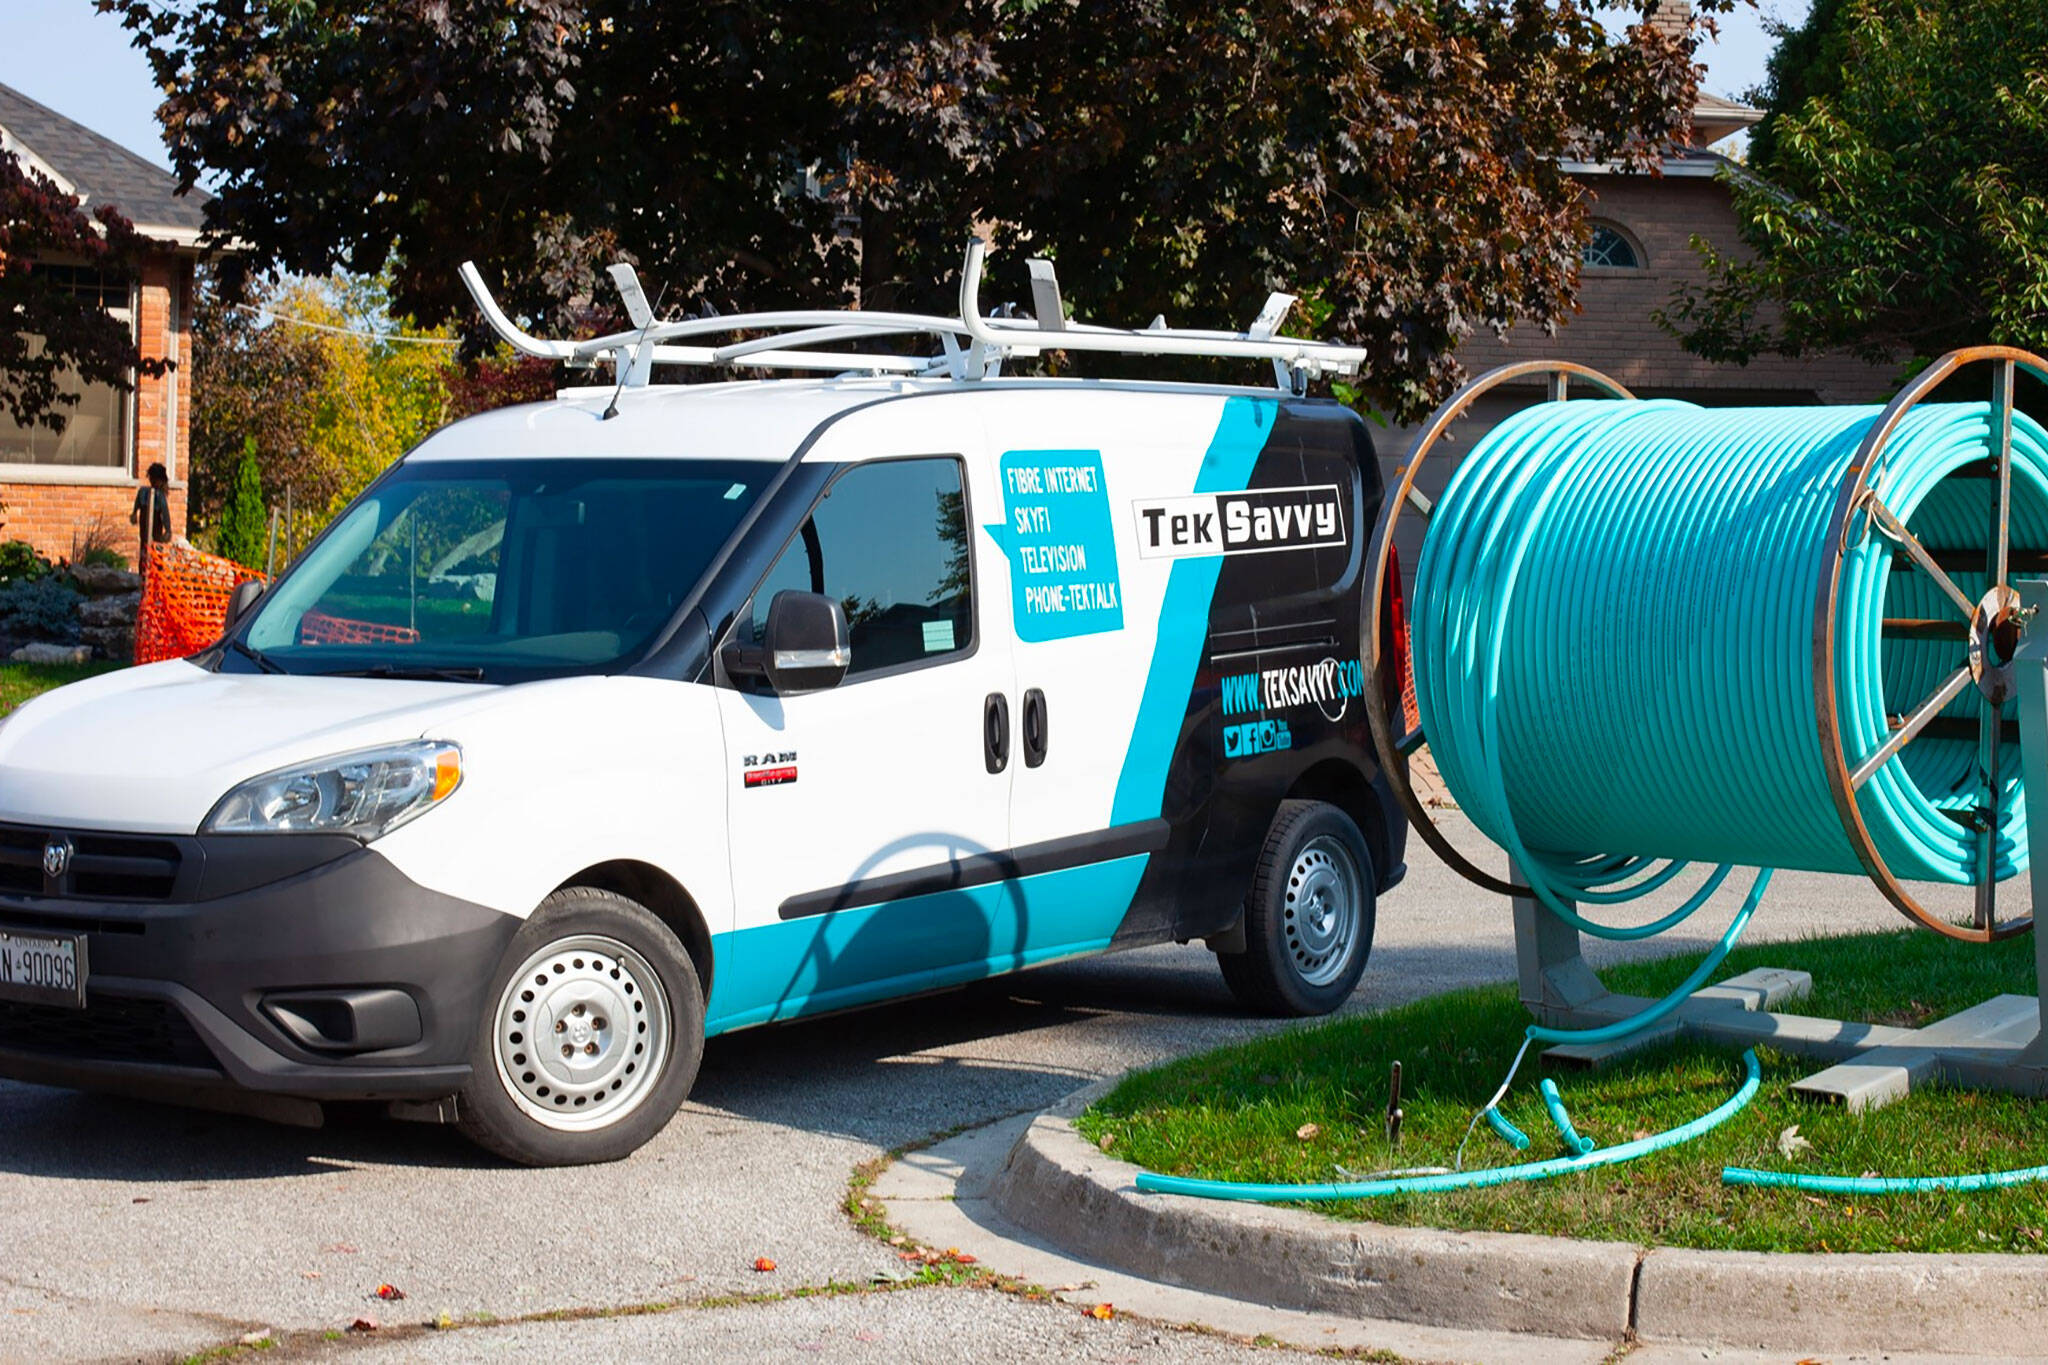 Internet providers in Toronto beyond Rogers and Bell